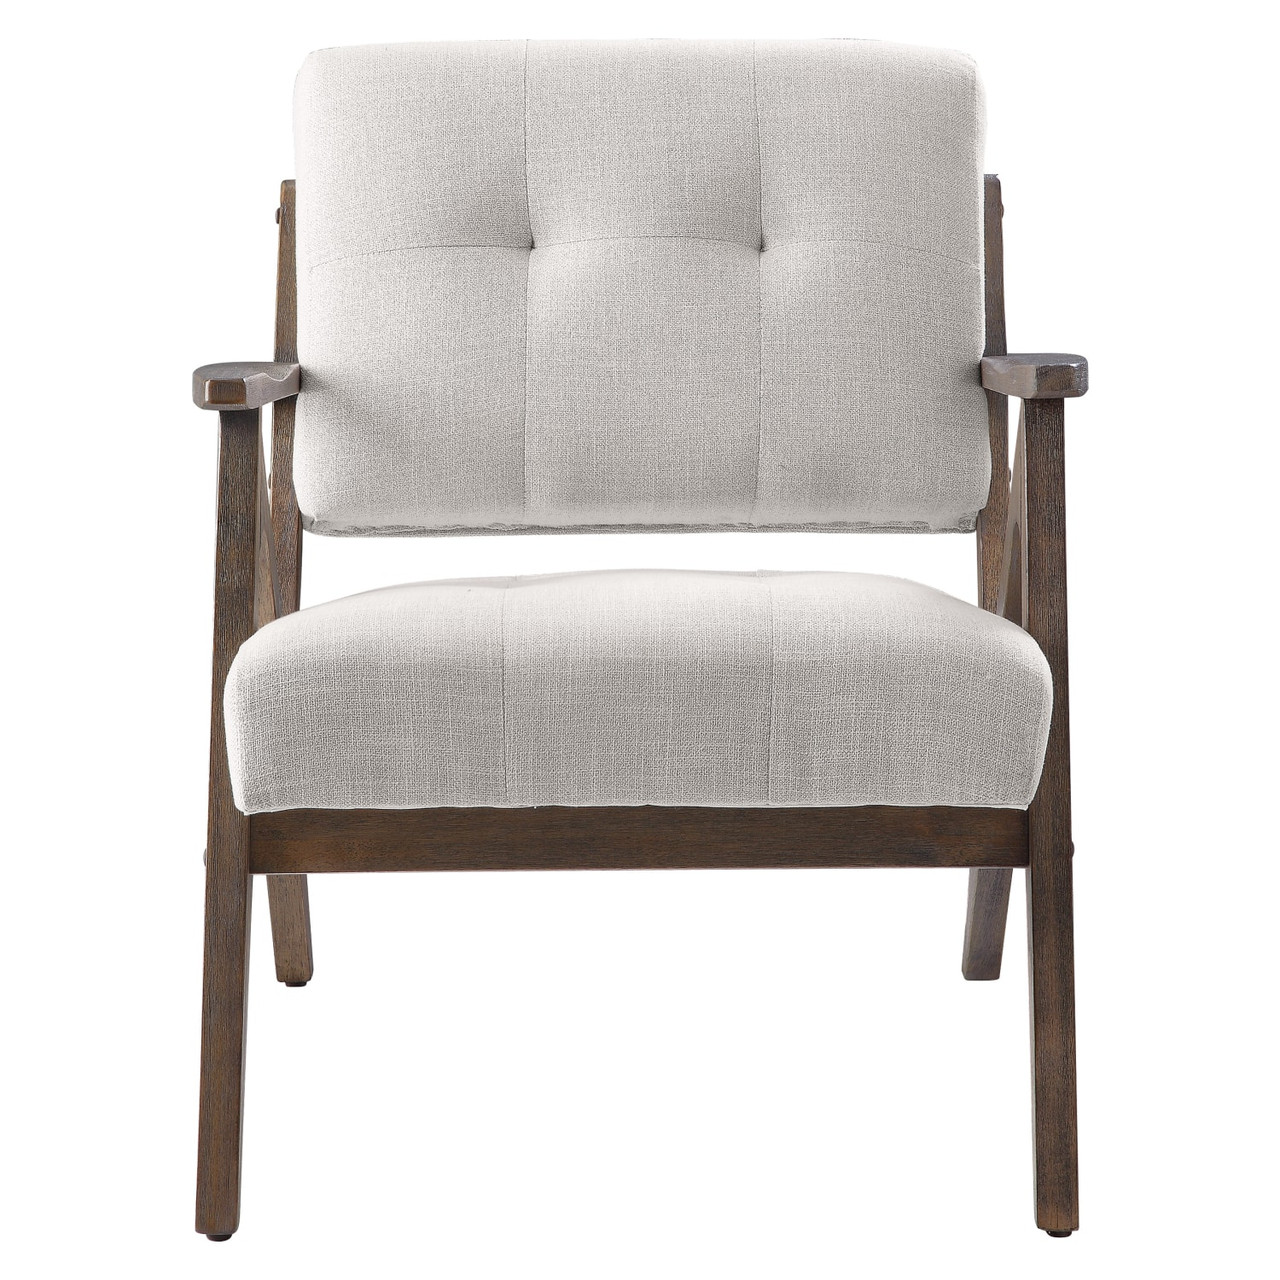 Reuben Armchair in Linen Fabric with Brown Brushed Wood Frame K/D